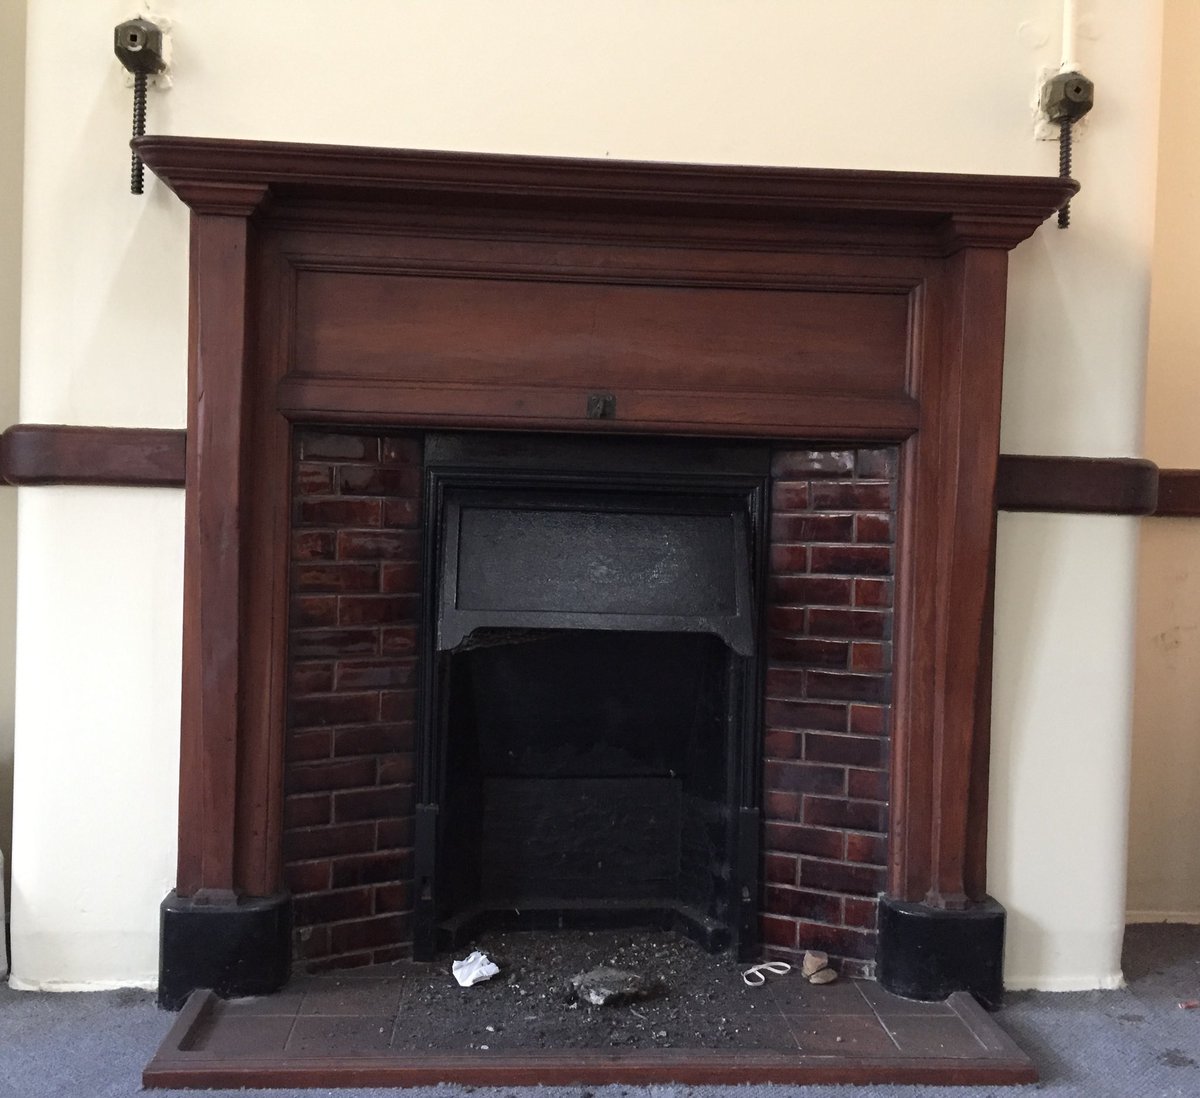 Day 4 #ArchiveAdventCalendar 

#WarmFire 

You will need your imagination for this one!!

Some lovely fireplaces, photos taken in 2016

#Whitchurchhospital 
#mentalhealthhistory 
#fireplace
#coalfire